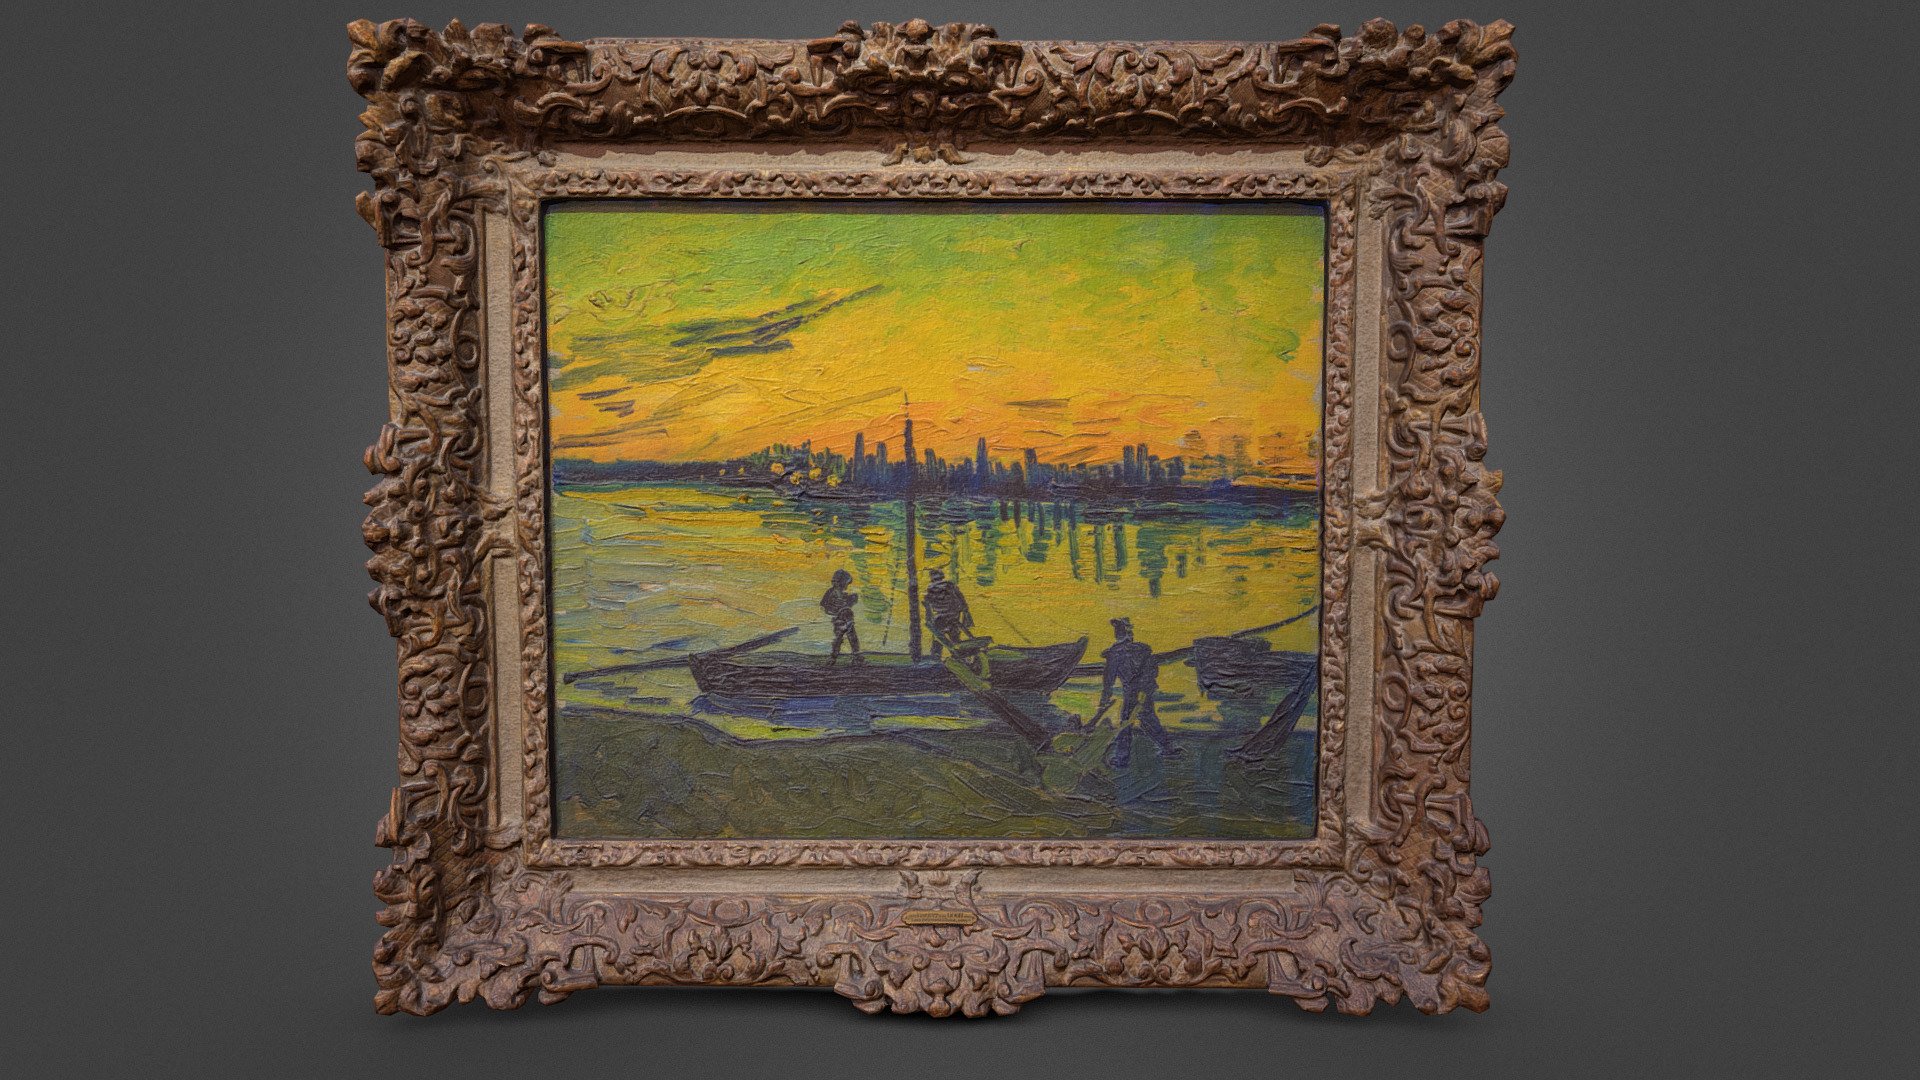 The Stevedores in Arles
1888
Oil on canvas. 54 x 65 cm
Museo Nacional Thyssen-Bornemisza, Madrid
Inv. no. 557 (1965.7) - Vincent van Gogh - The Stevedores in Arles - 3D model by Morty 3d model